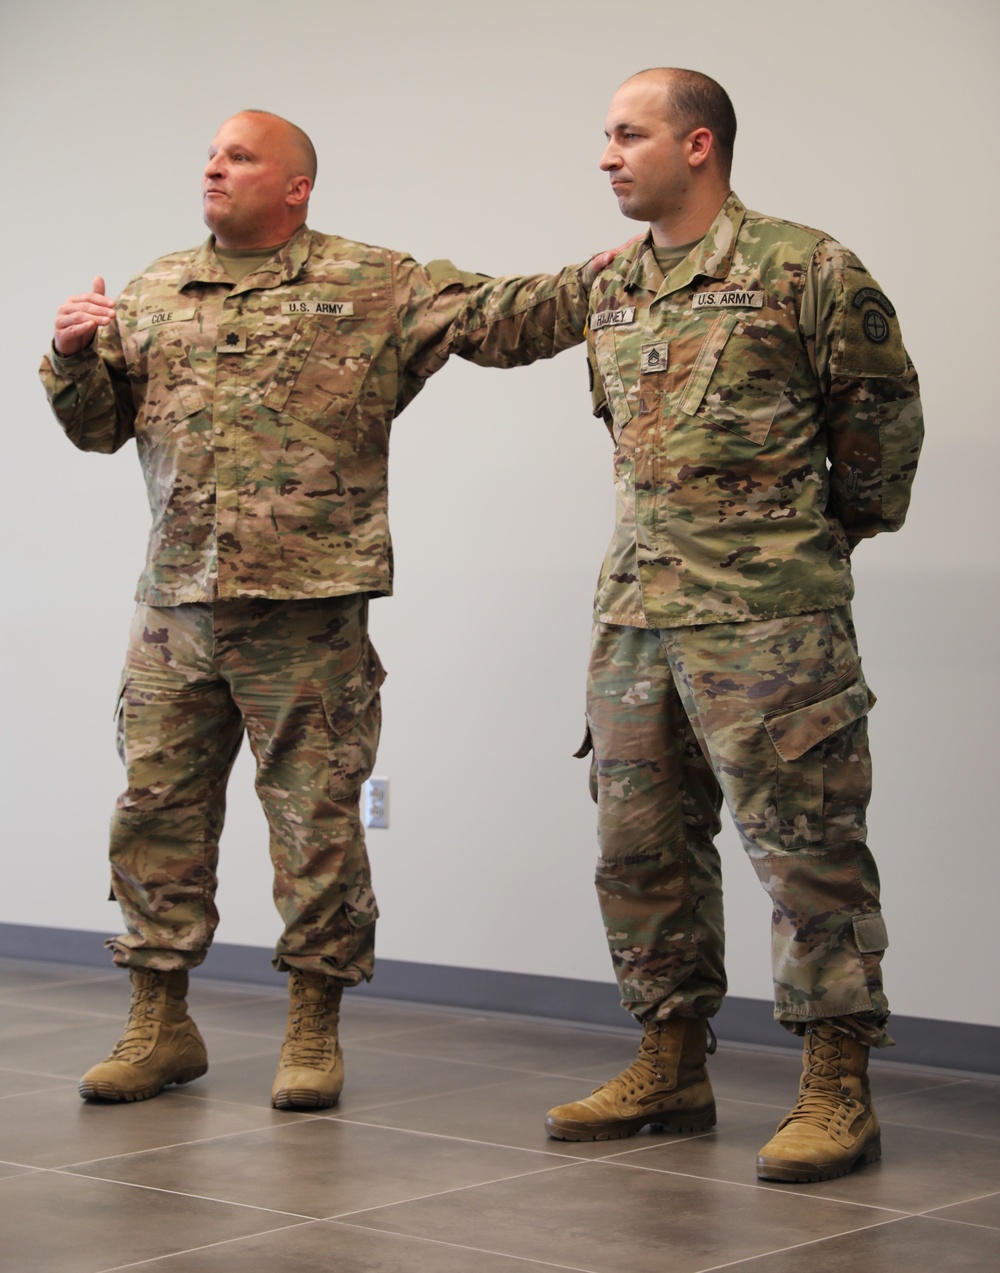 Master Sgt. Hajney promoted by son during ceremony